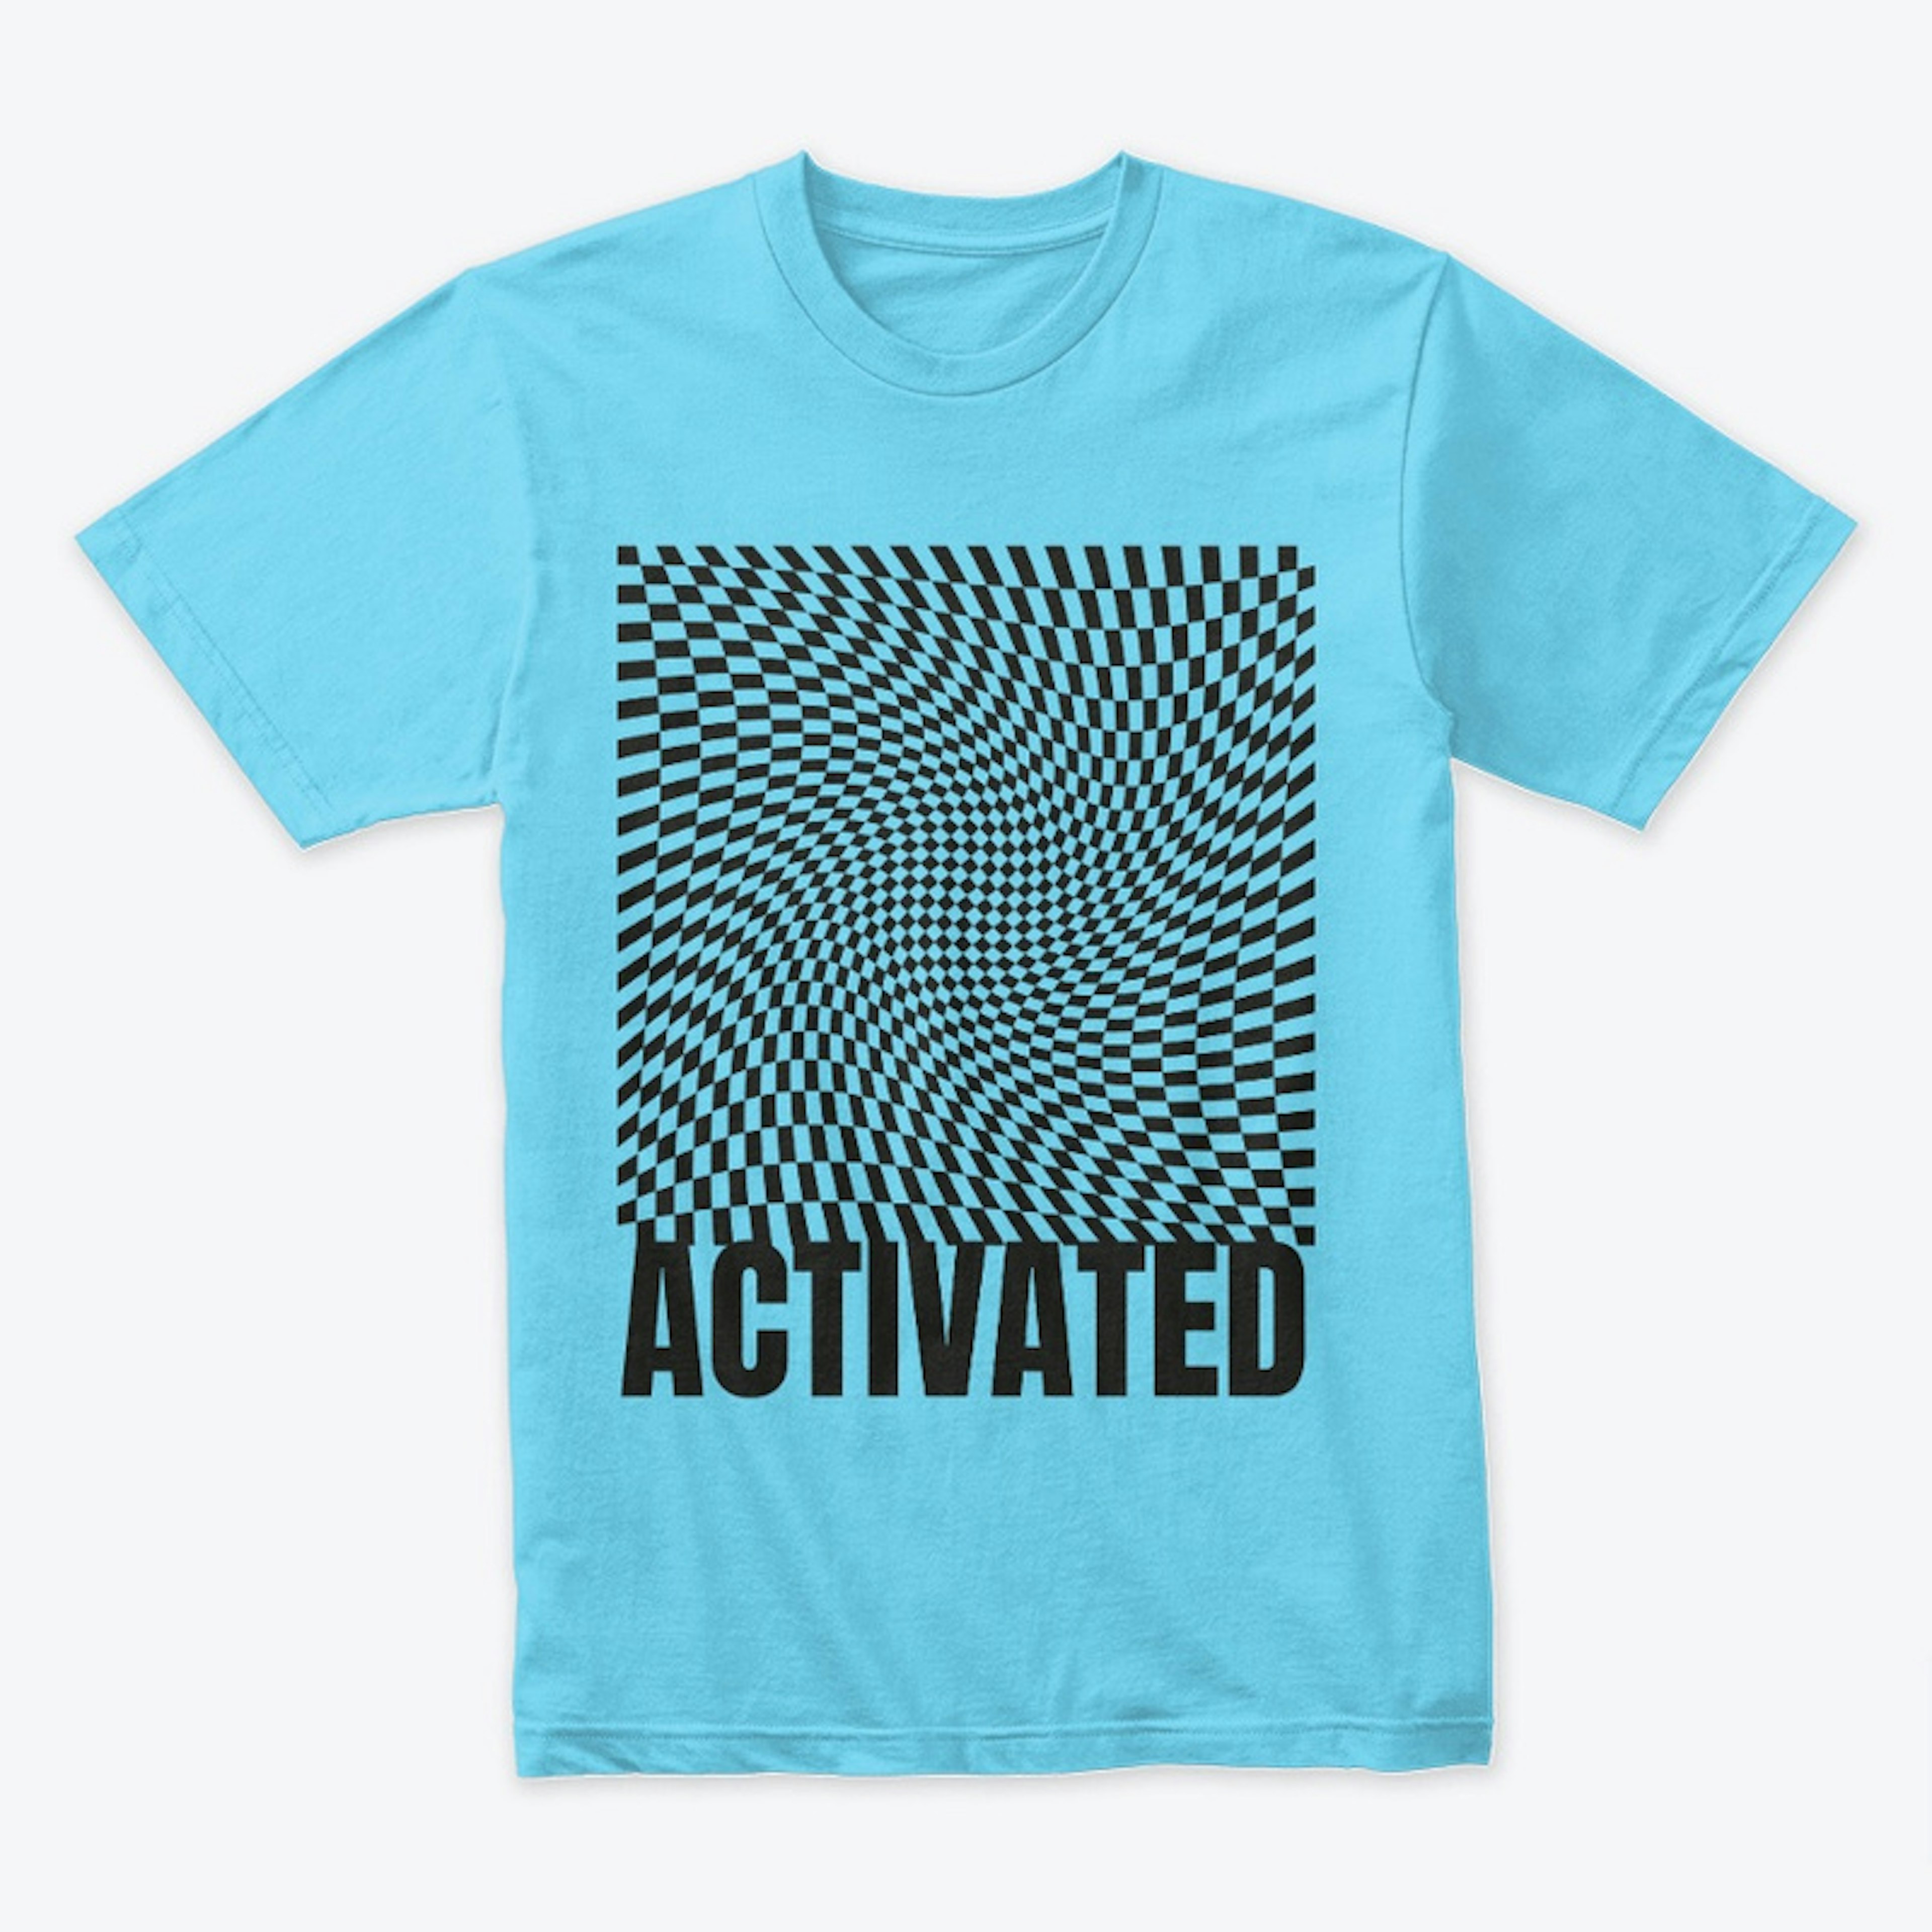 "ACTIVATED" Optical Illusion Apparel 